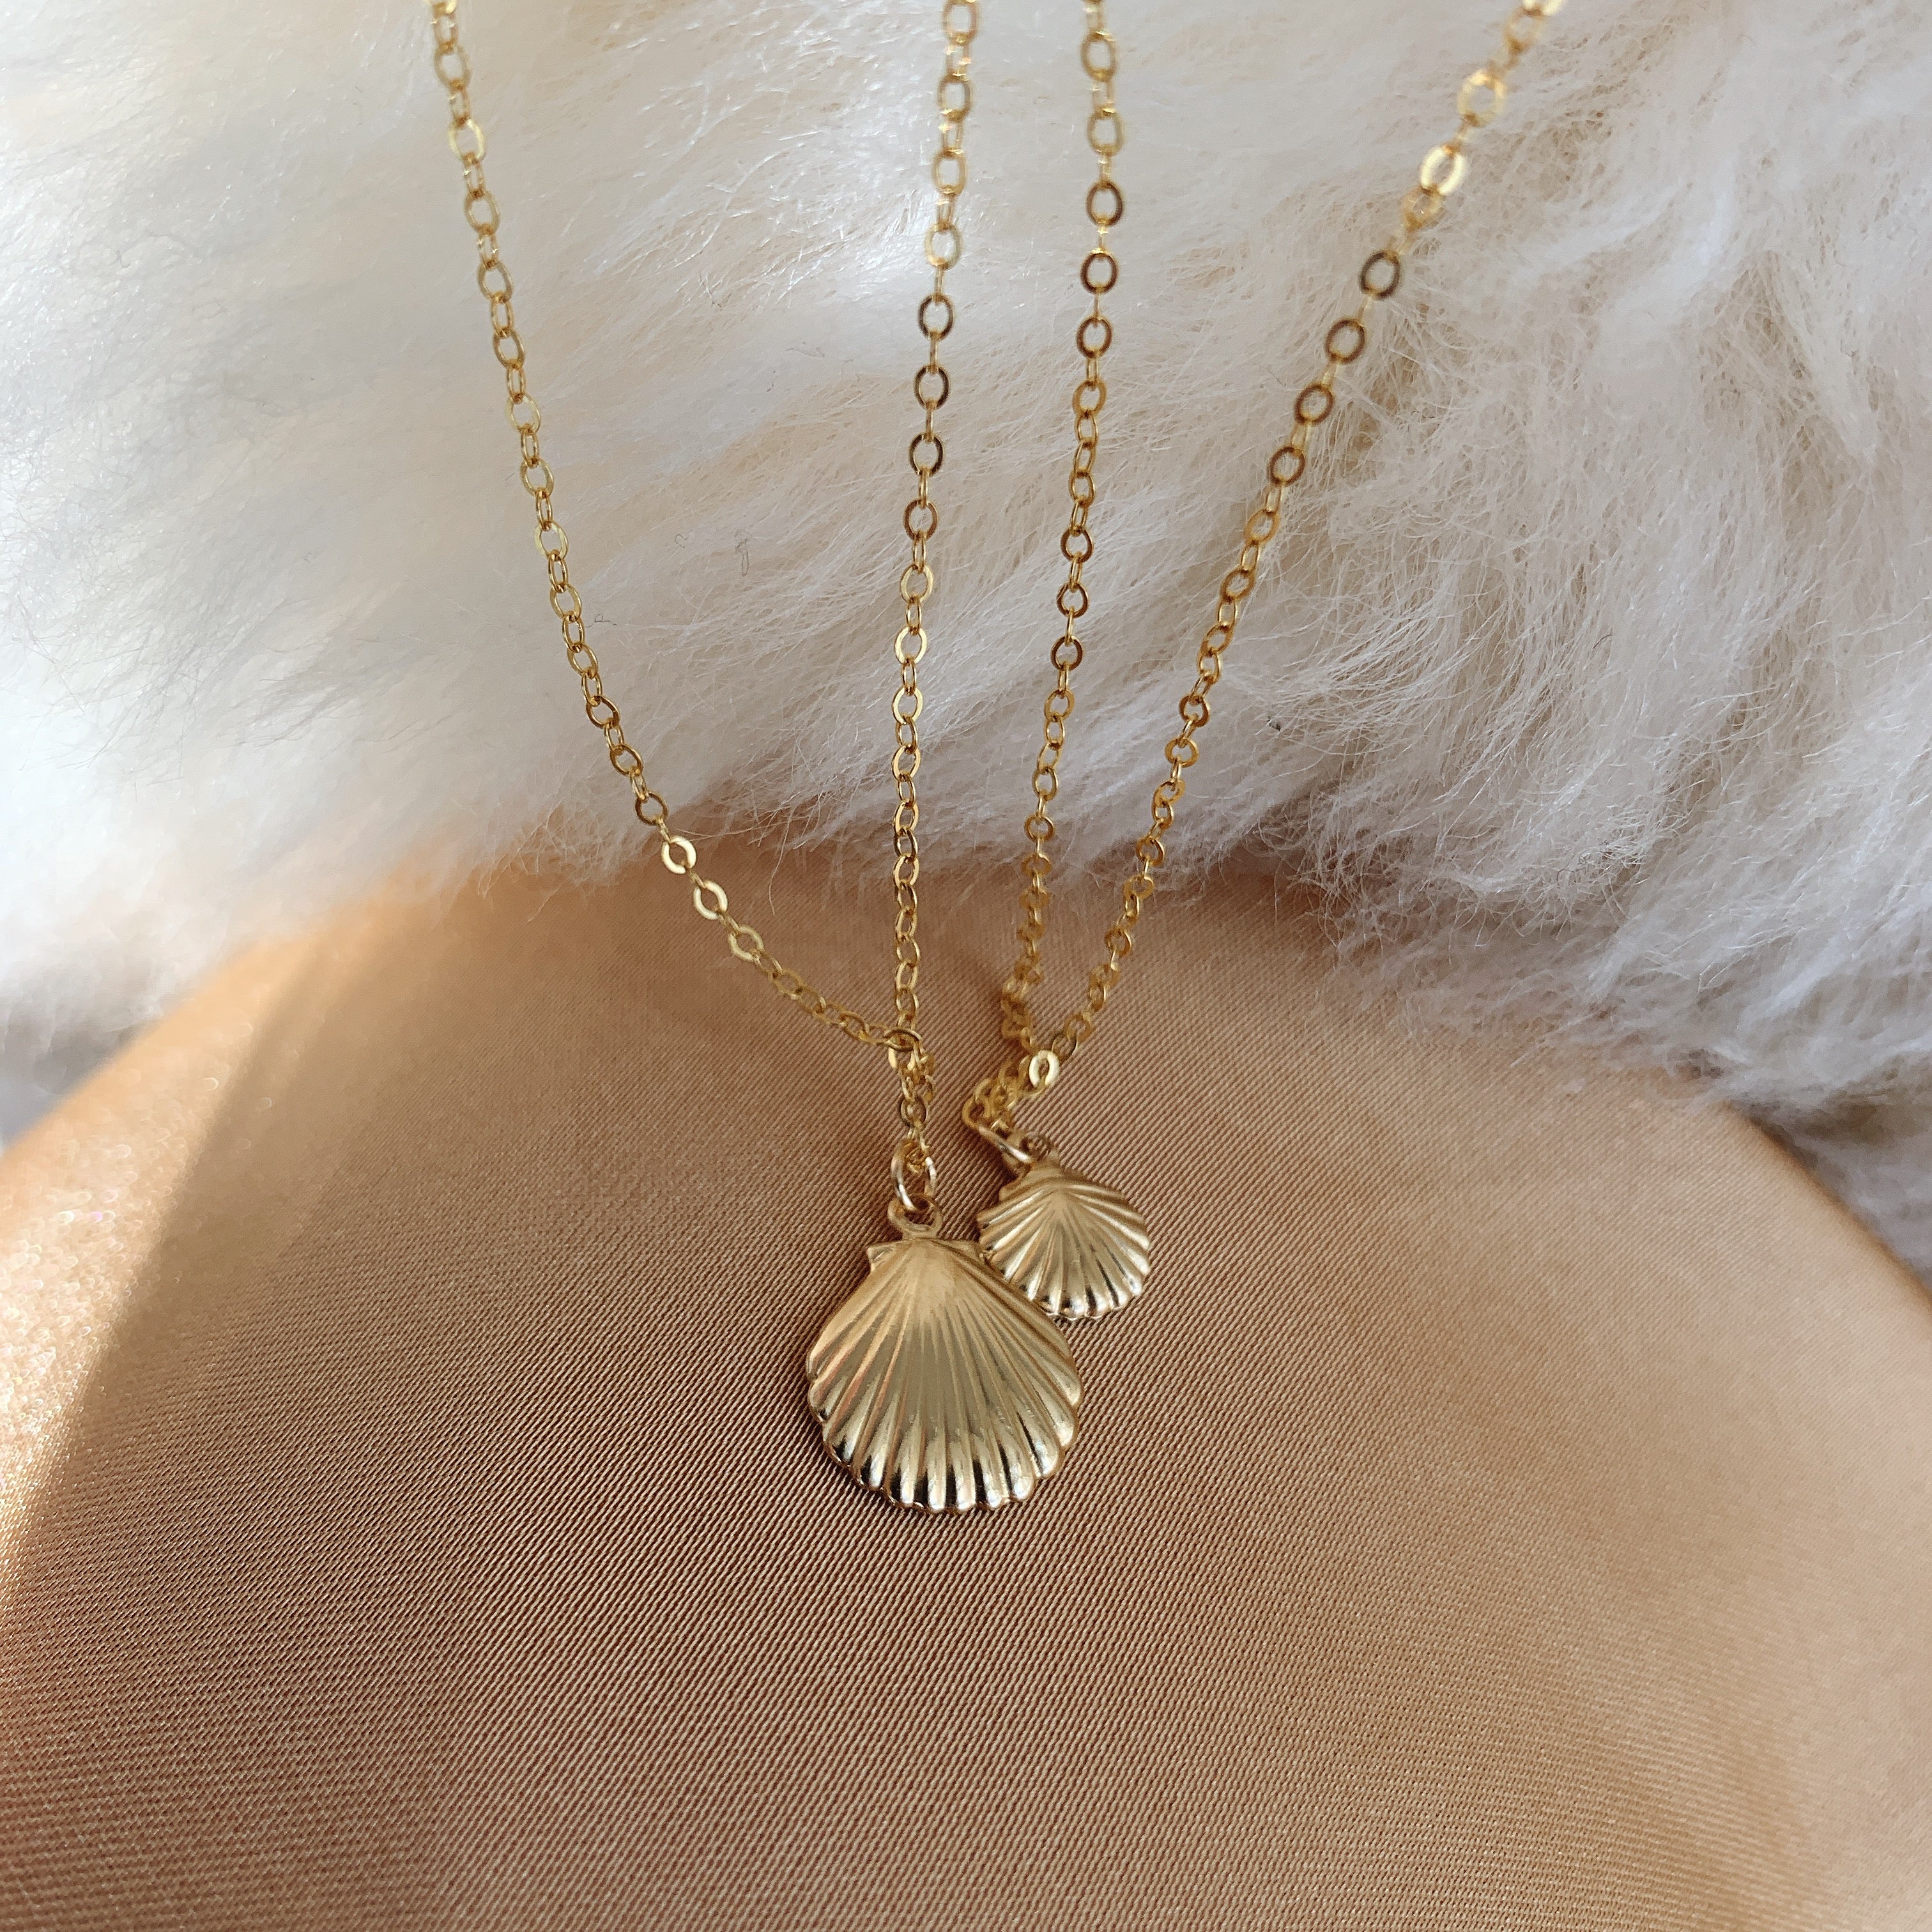 Shell Necklace 14k Gold Covered Fan-Shaped Anti-Allergy Necklace